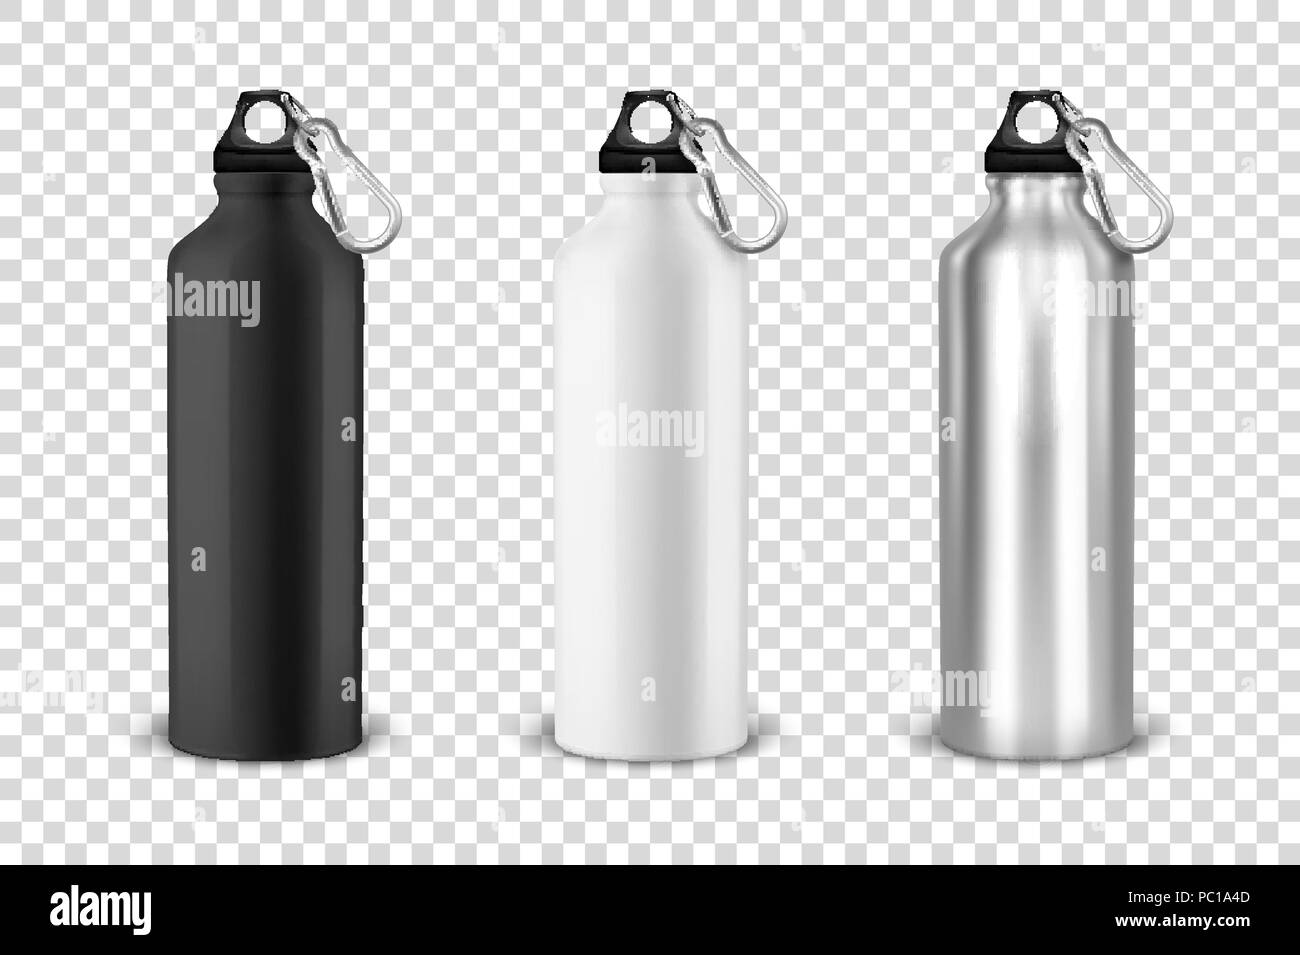 Download Vector Realistic 3d Black White And Silver Empty Glossy Metal Water Bottle With Black Bung Icon